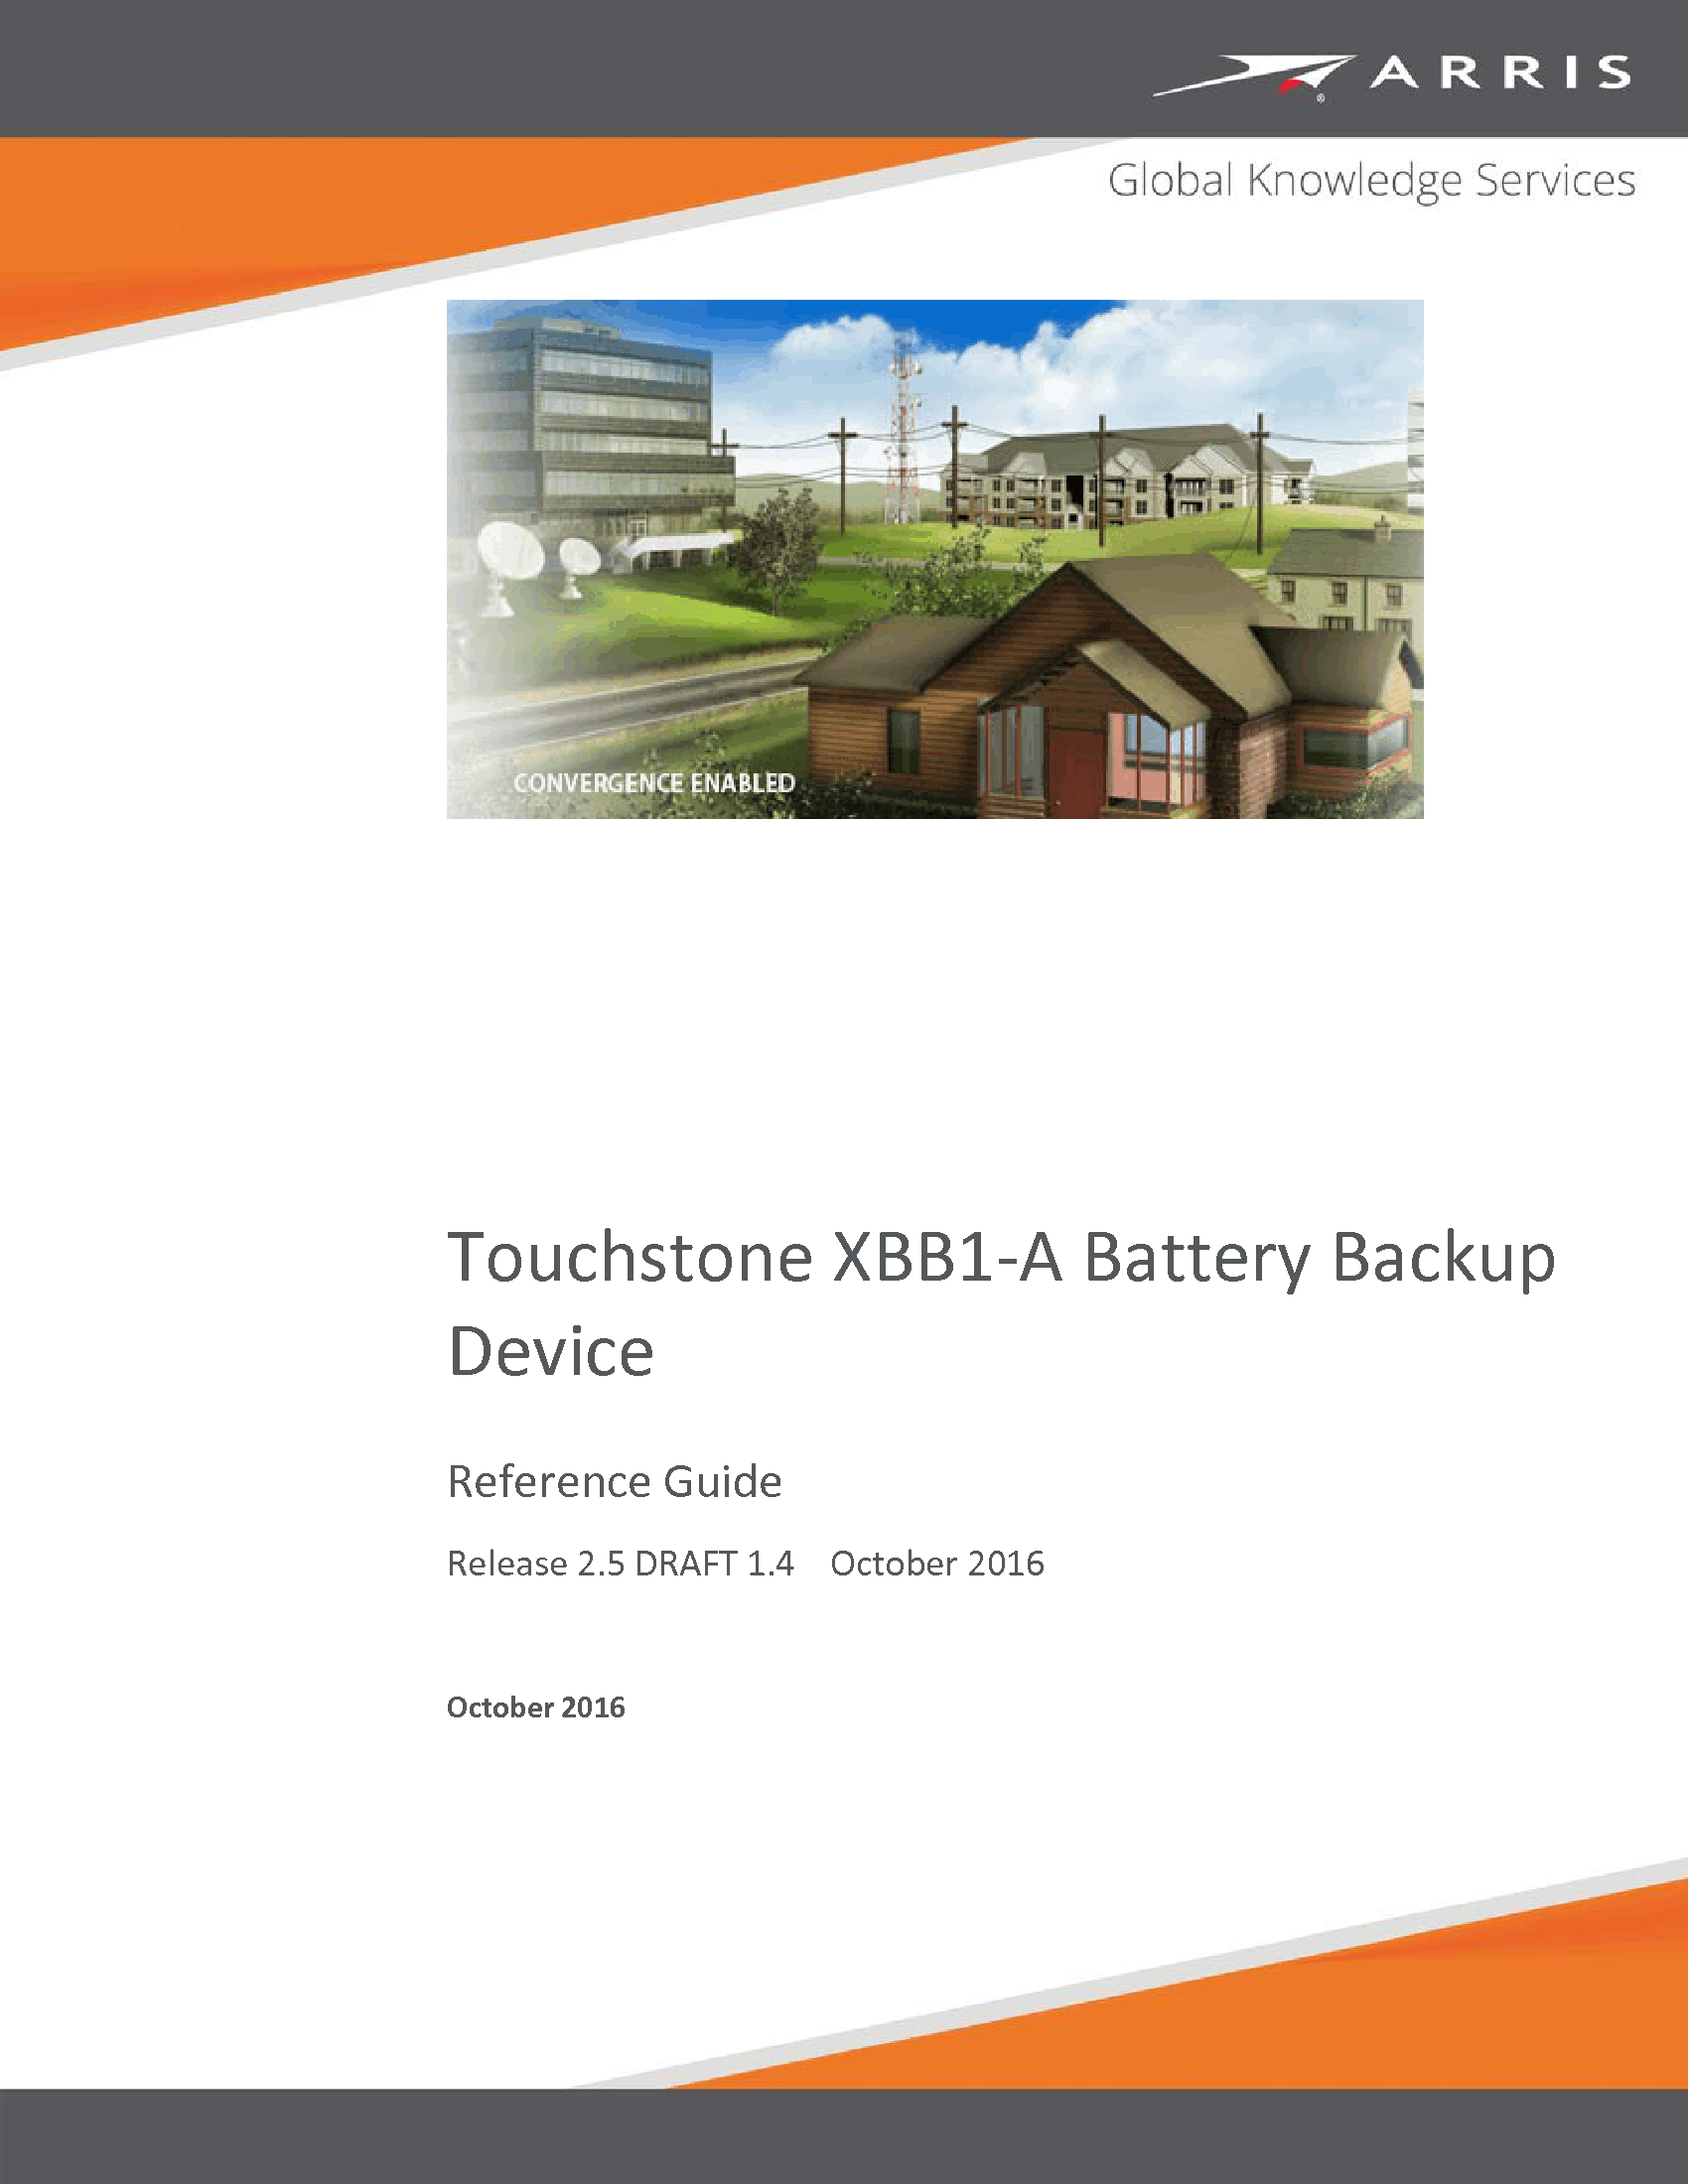   Touchstone XBB1-A Battery Backup Device Reference Guide Release 2.5 DRAFT 1.4    October 2016  October 2016  